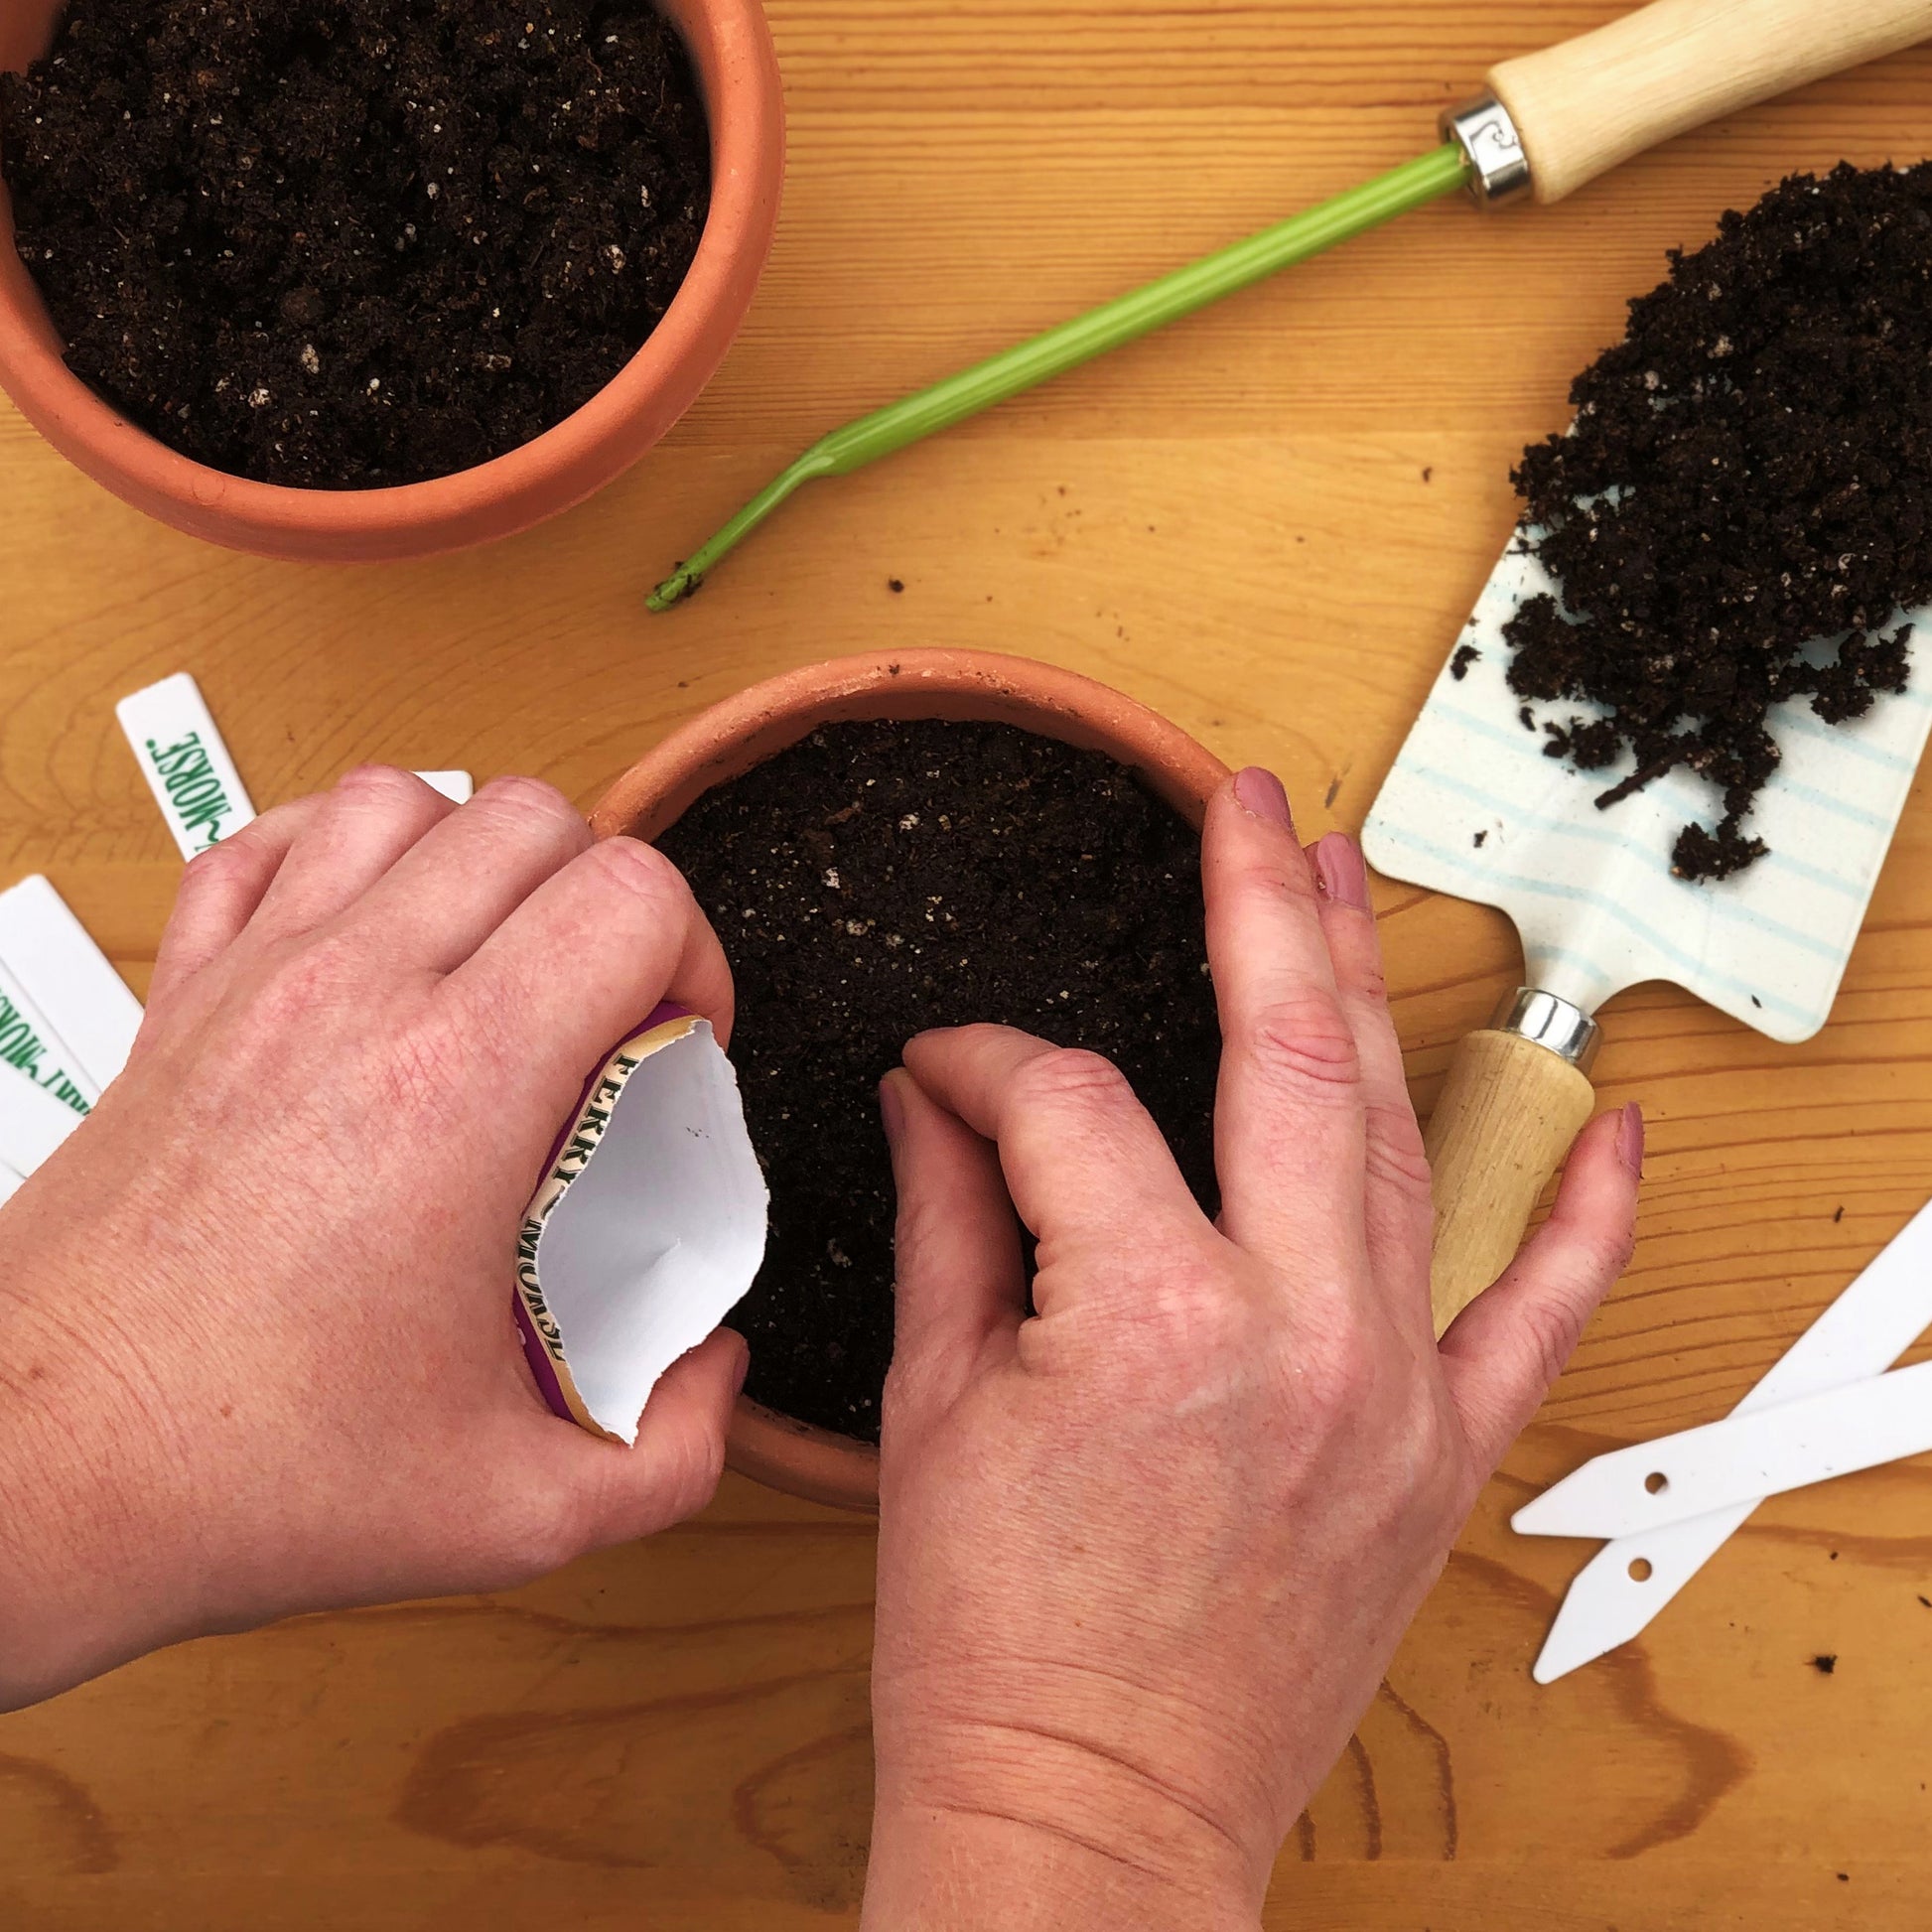 Sowing Bloomsdale Long Standing Organic Spinach Seeds into a container filled with seed starting mix.